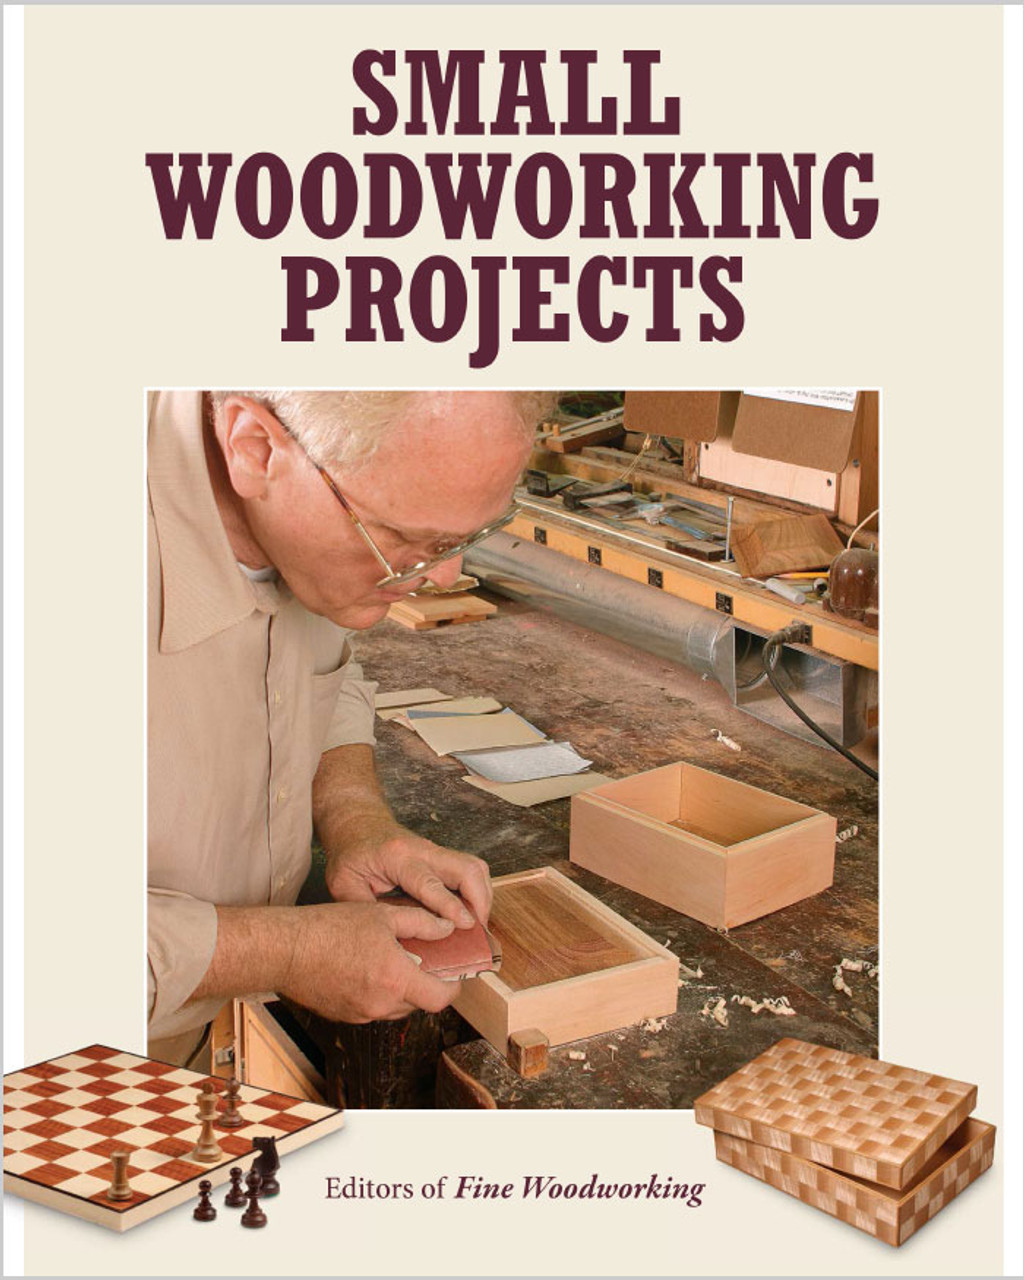 Free Woodworking Plans for Your Next Woodworking Project